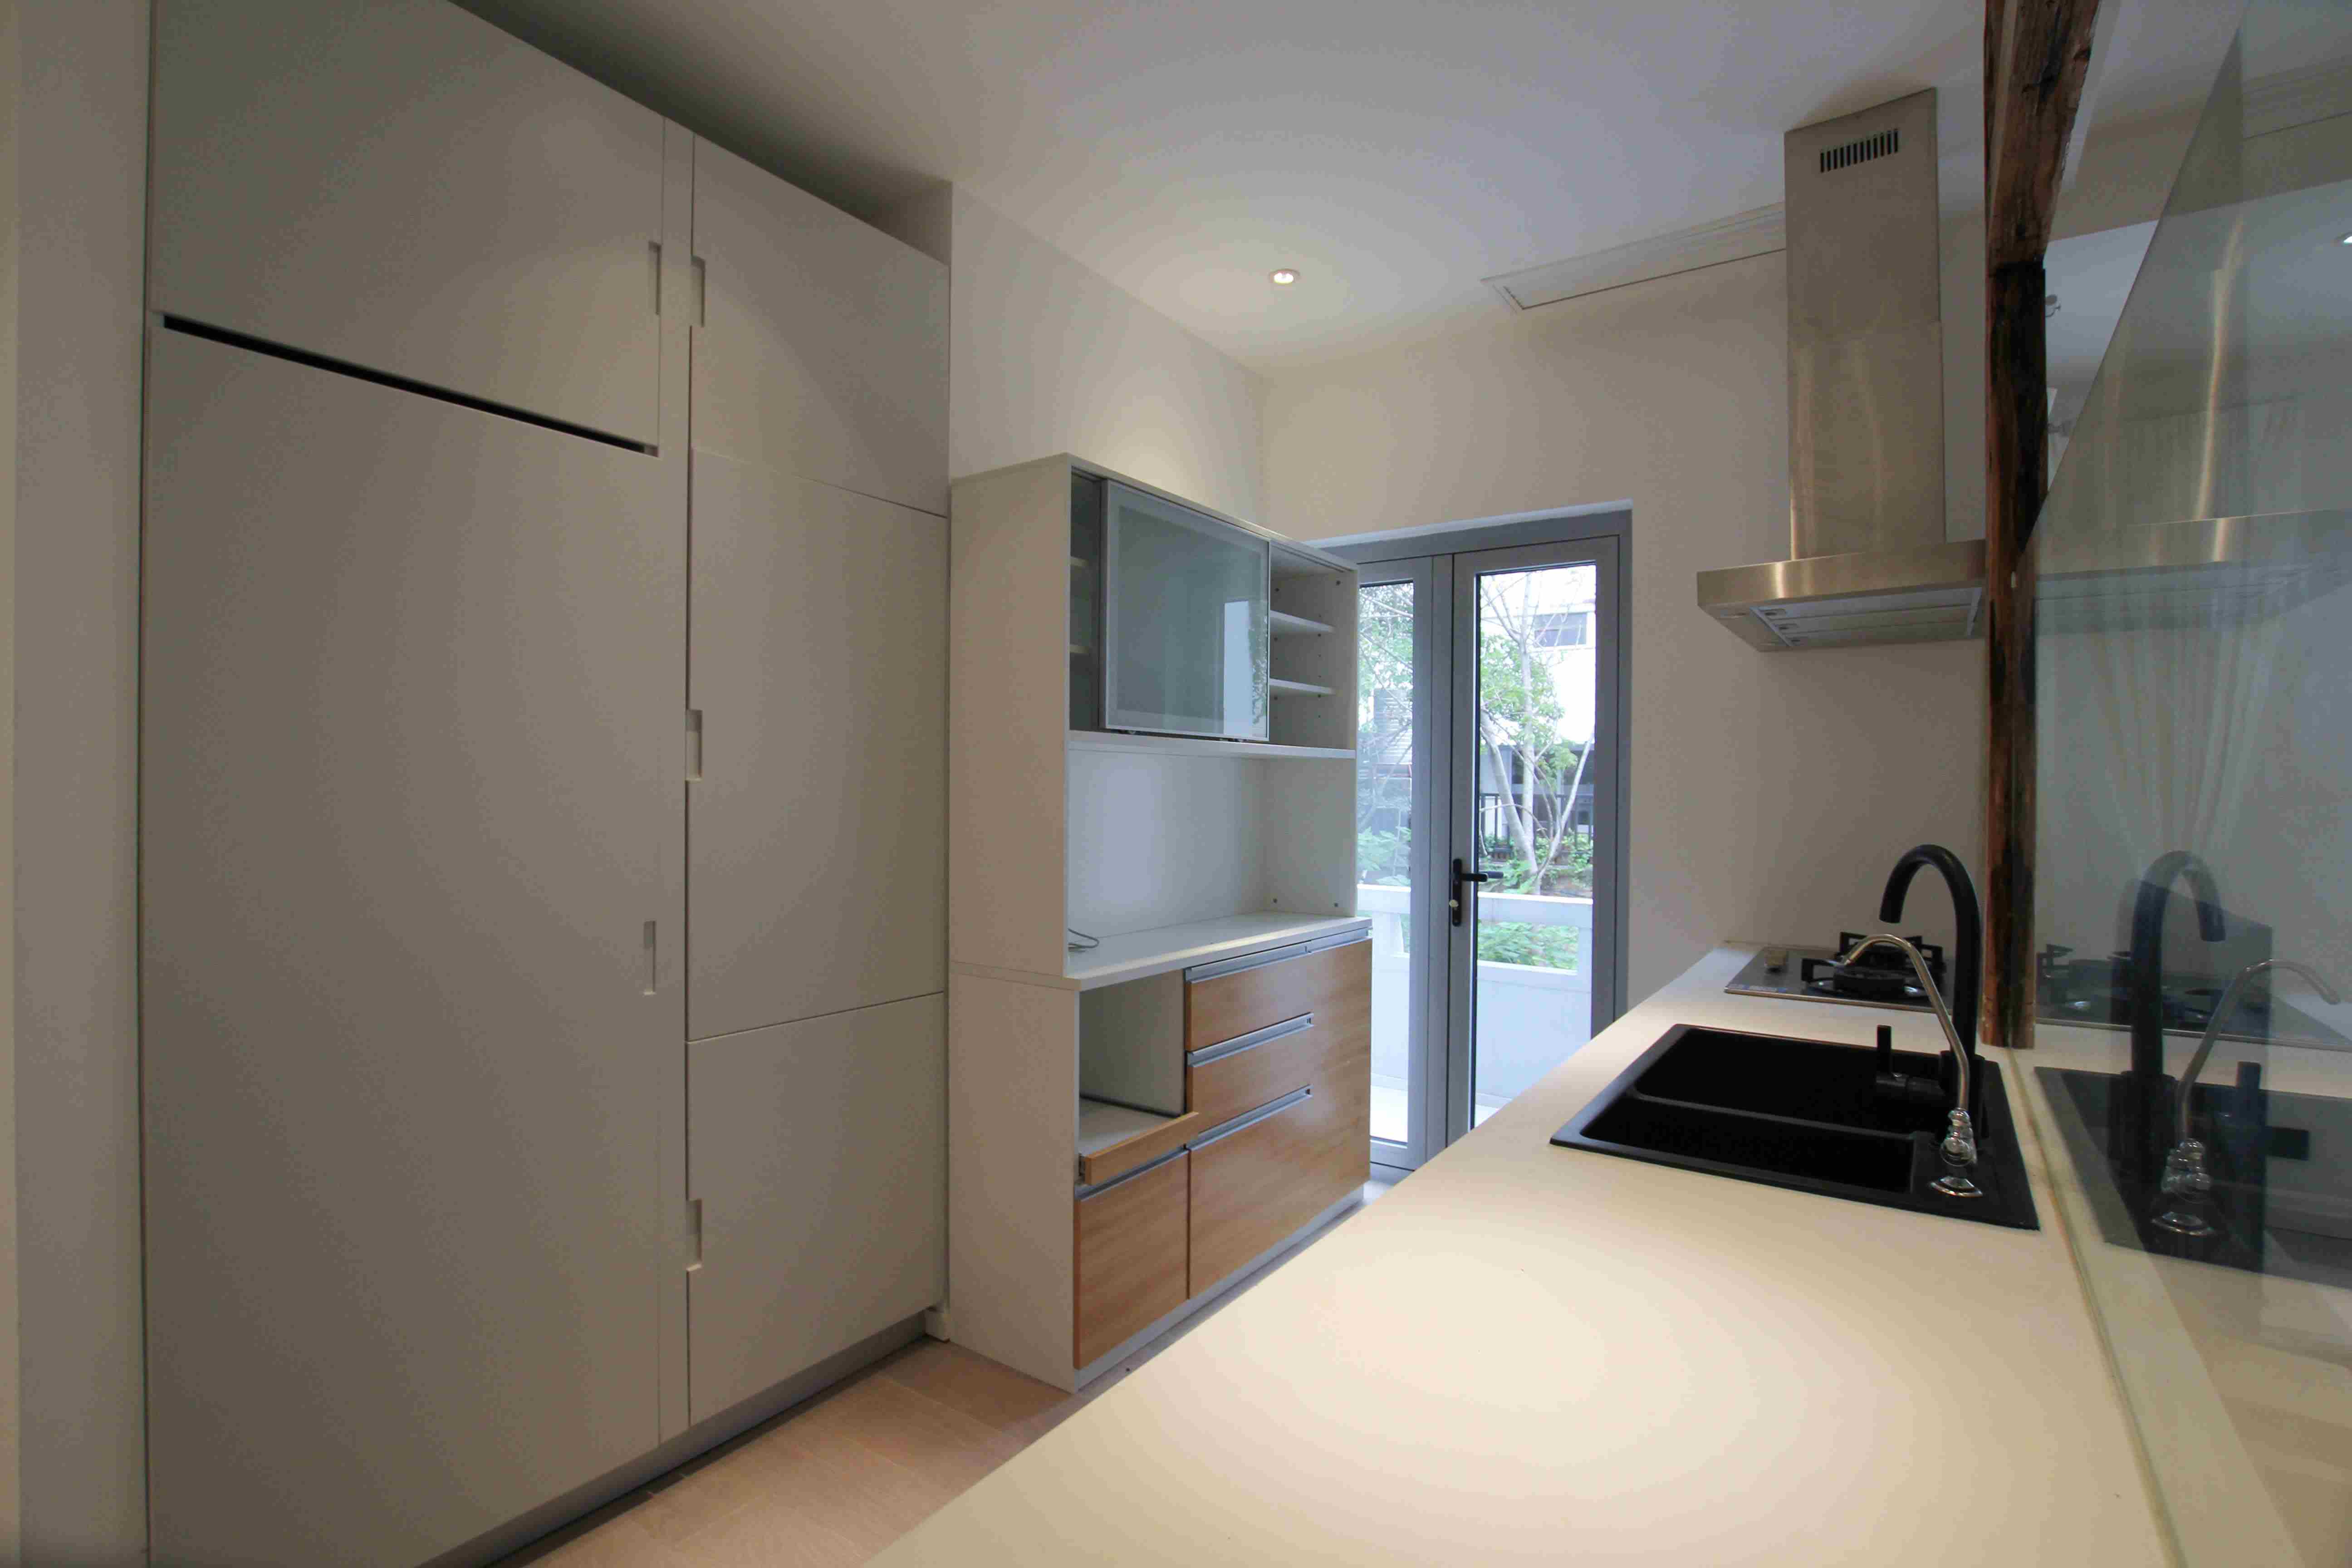 storage cabinets Entire Spacious 2F Apt in Renovated FFC Lane House for Rent in Shanghai